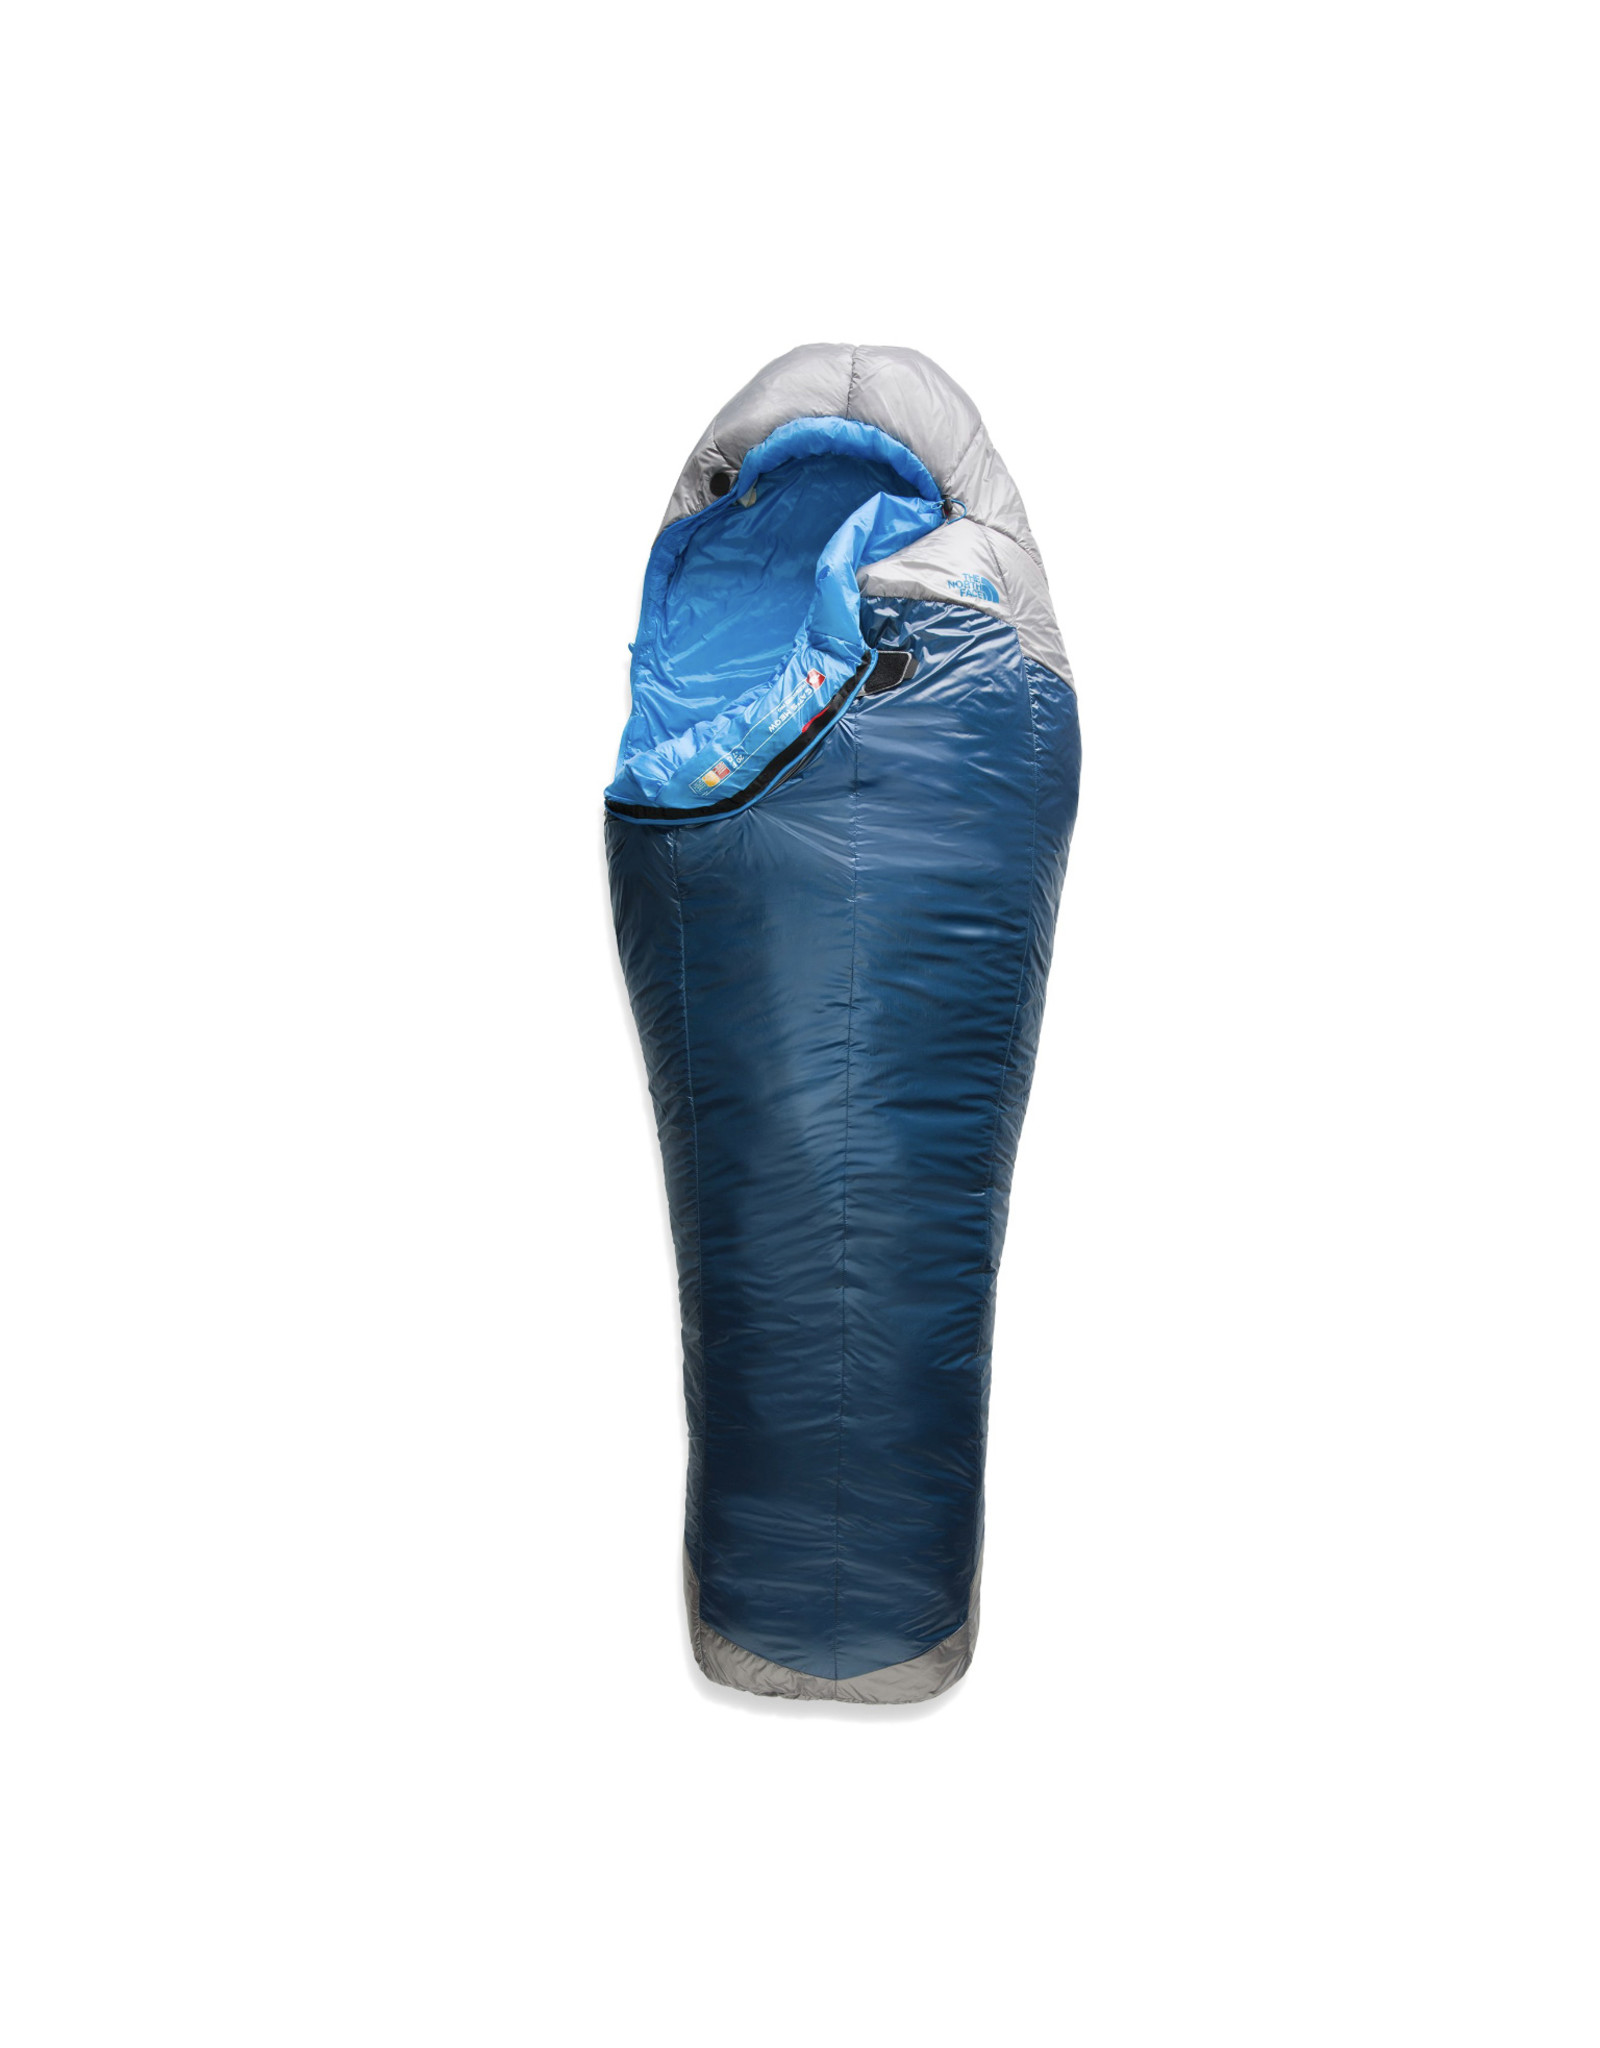 THE NORTH FACE CAT'S MEOW -7c SLEEPING BAG